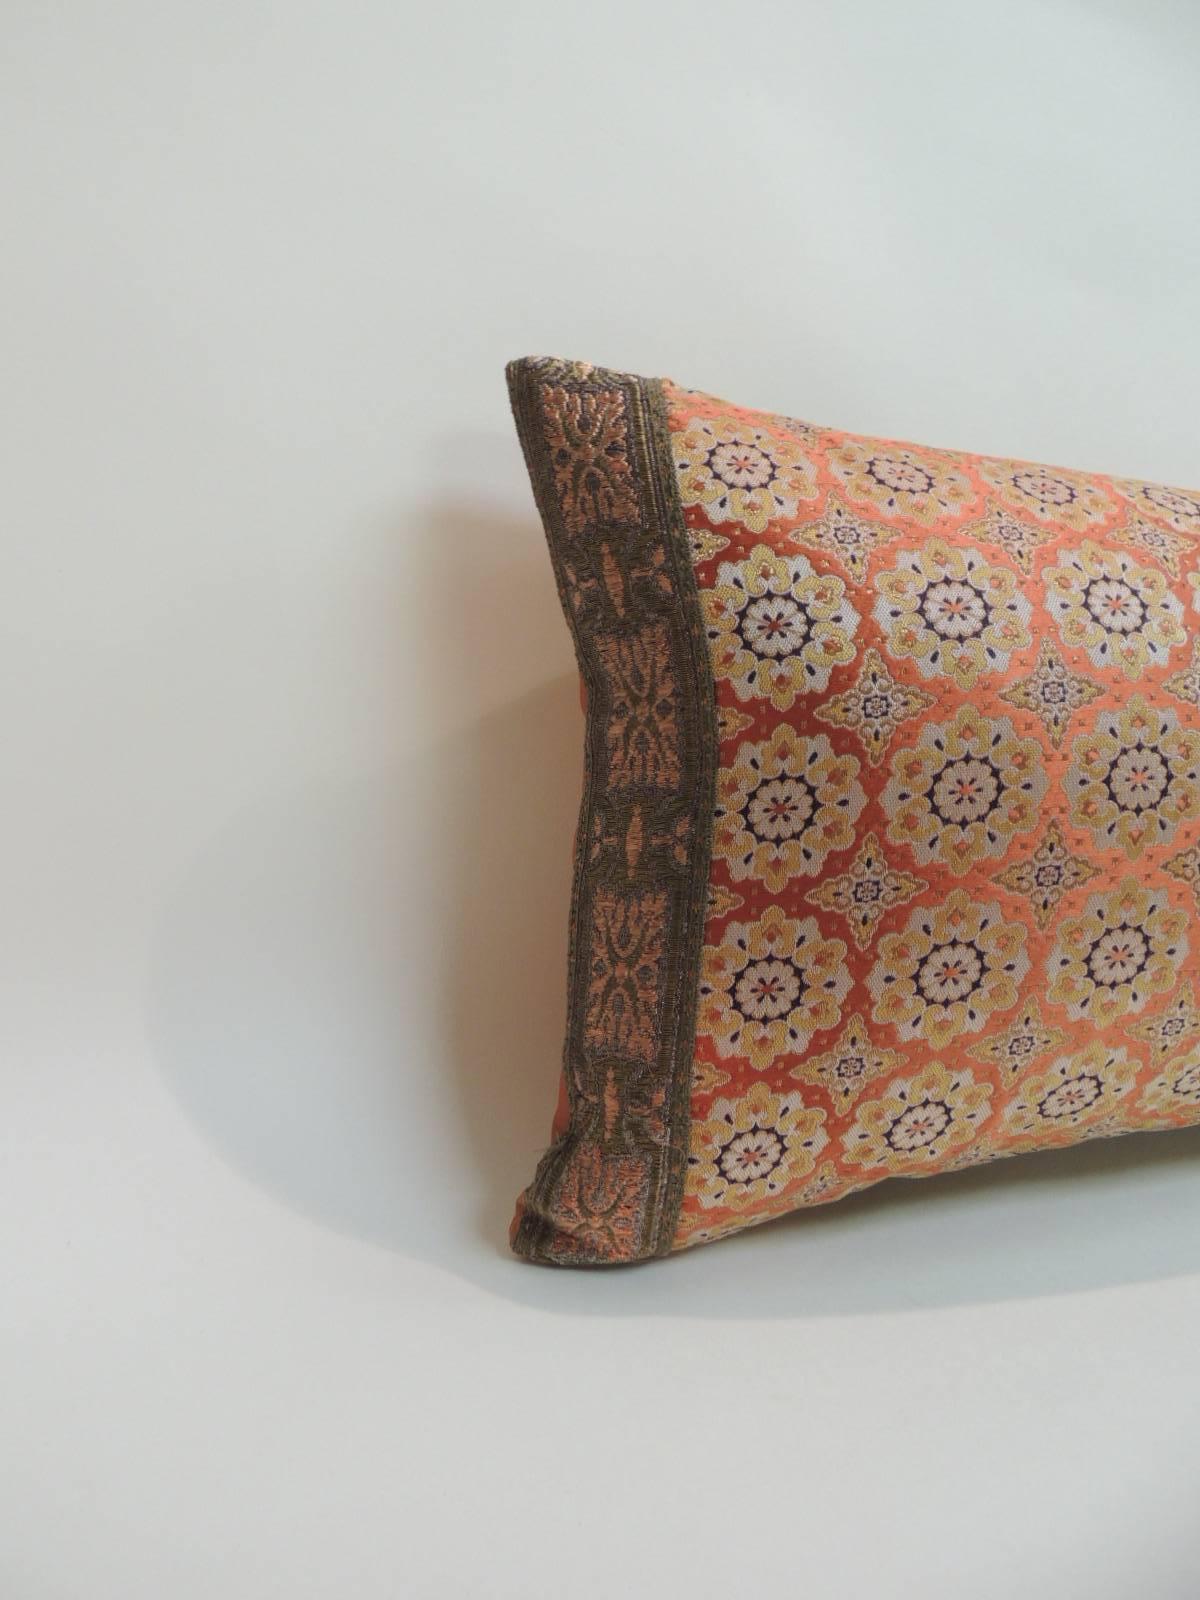 Vintage Asian Obi silk woven embroidery bolster decorative pillow
Vintage Japanese Obi sash floral pattern depicting flowers in full bloom decorate the front of the throw bolster pillow. Textile embellished with a burnt orange 19th century ornate